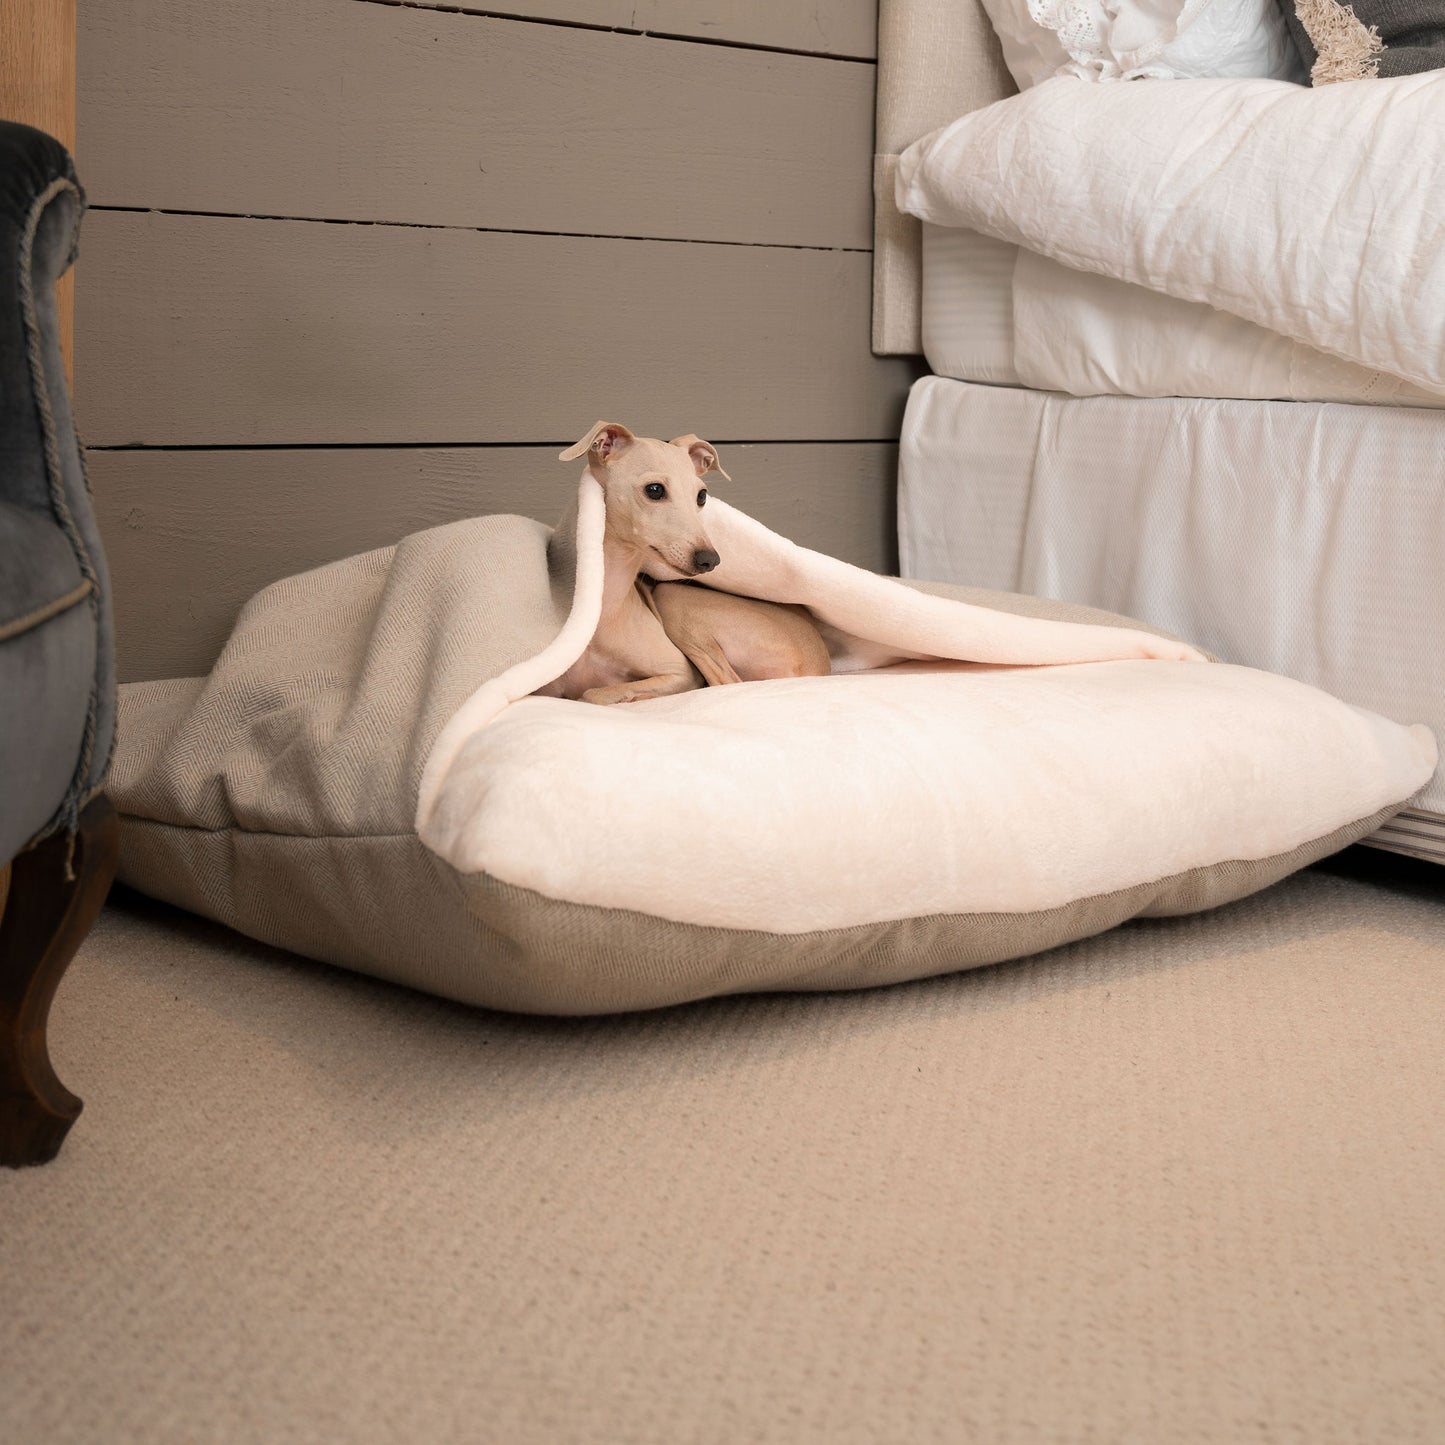 Discover The Perfect Burrow For Your Pet, Our Stunning Sleepy Burrow Dog Beds In Natural Herringbone Is The Perfect Bed Choice For Your Pet, Available Now at Lords & Labradors